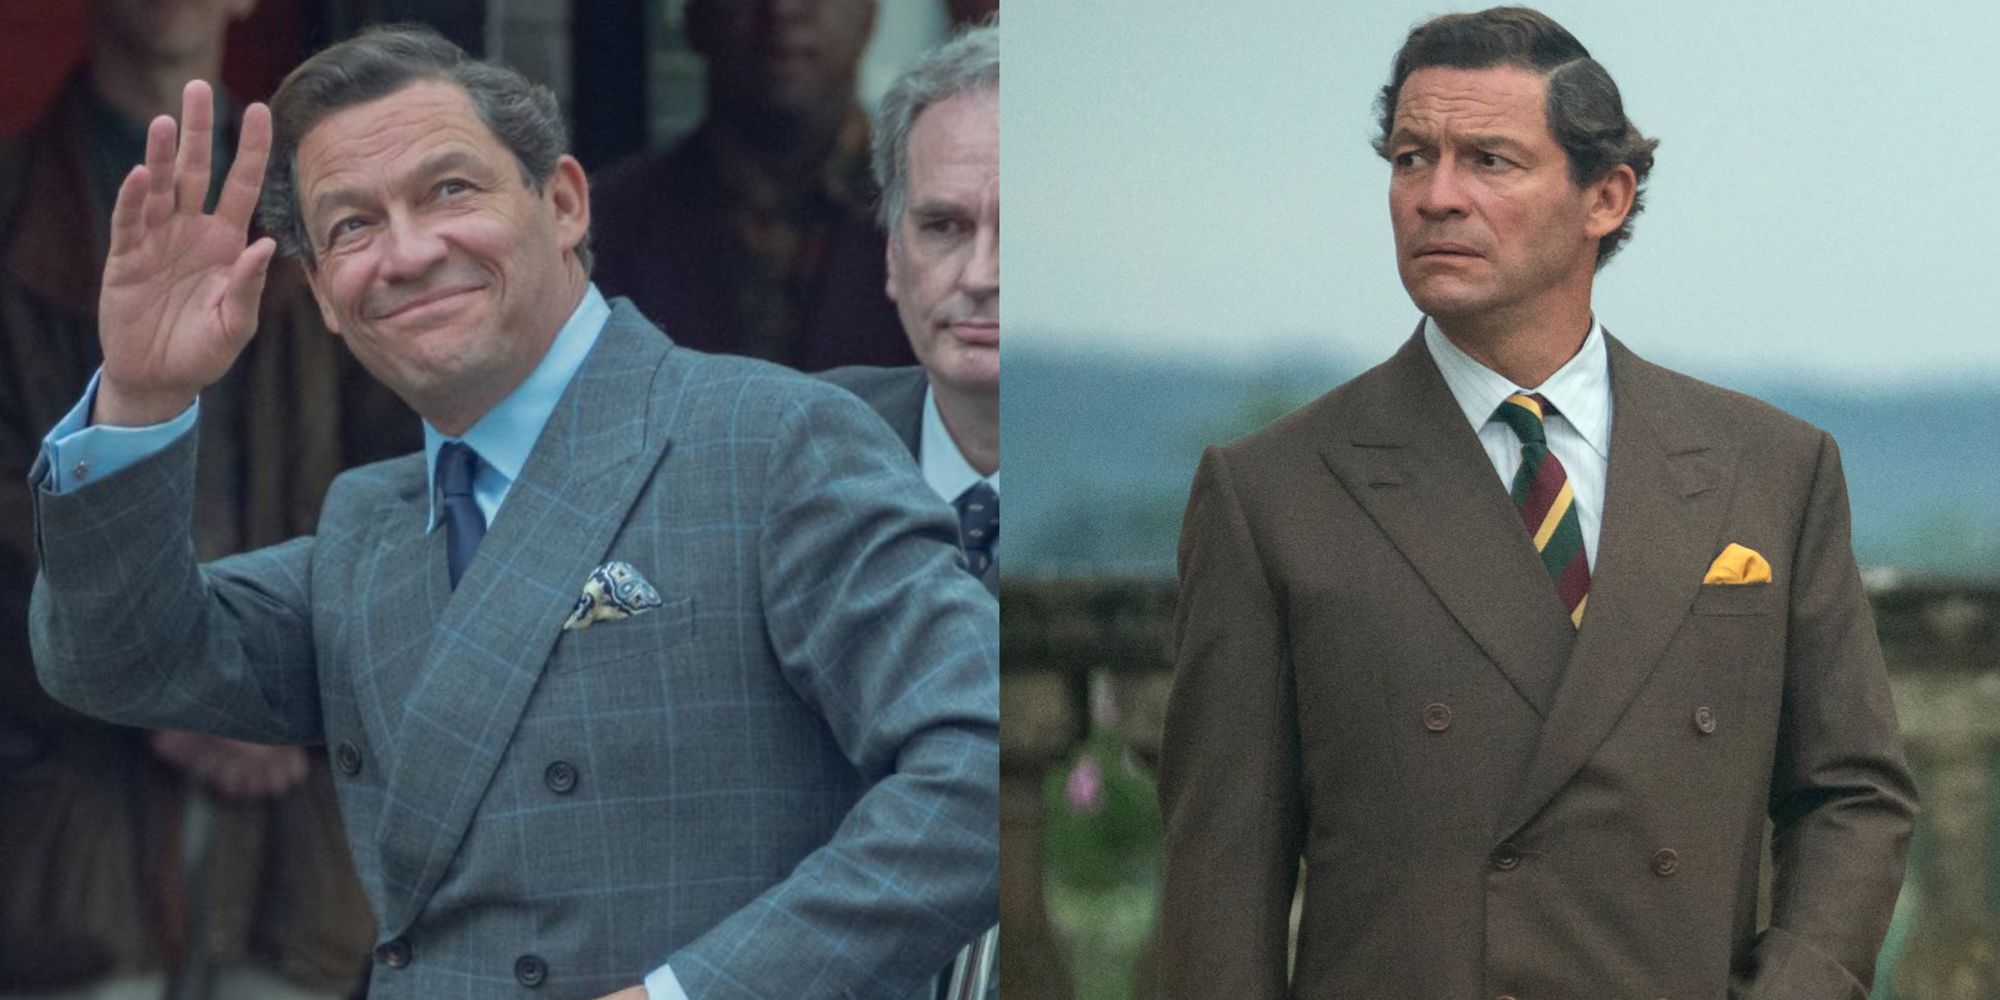 The Crown: 10 Mannerisms And Traits Dominic West Nails As Prince Charles